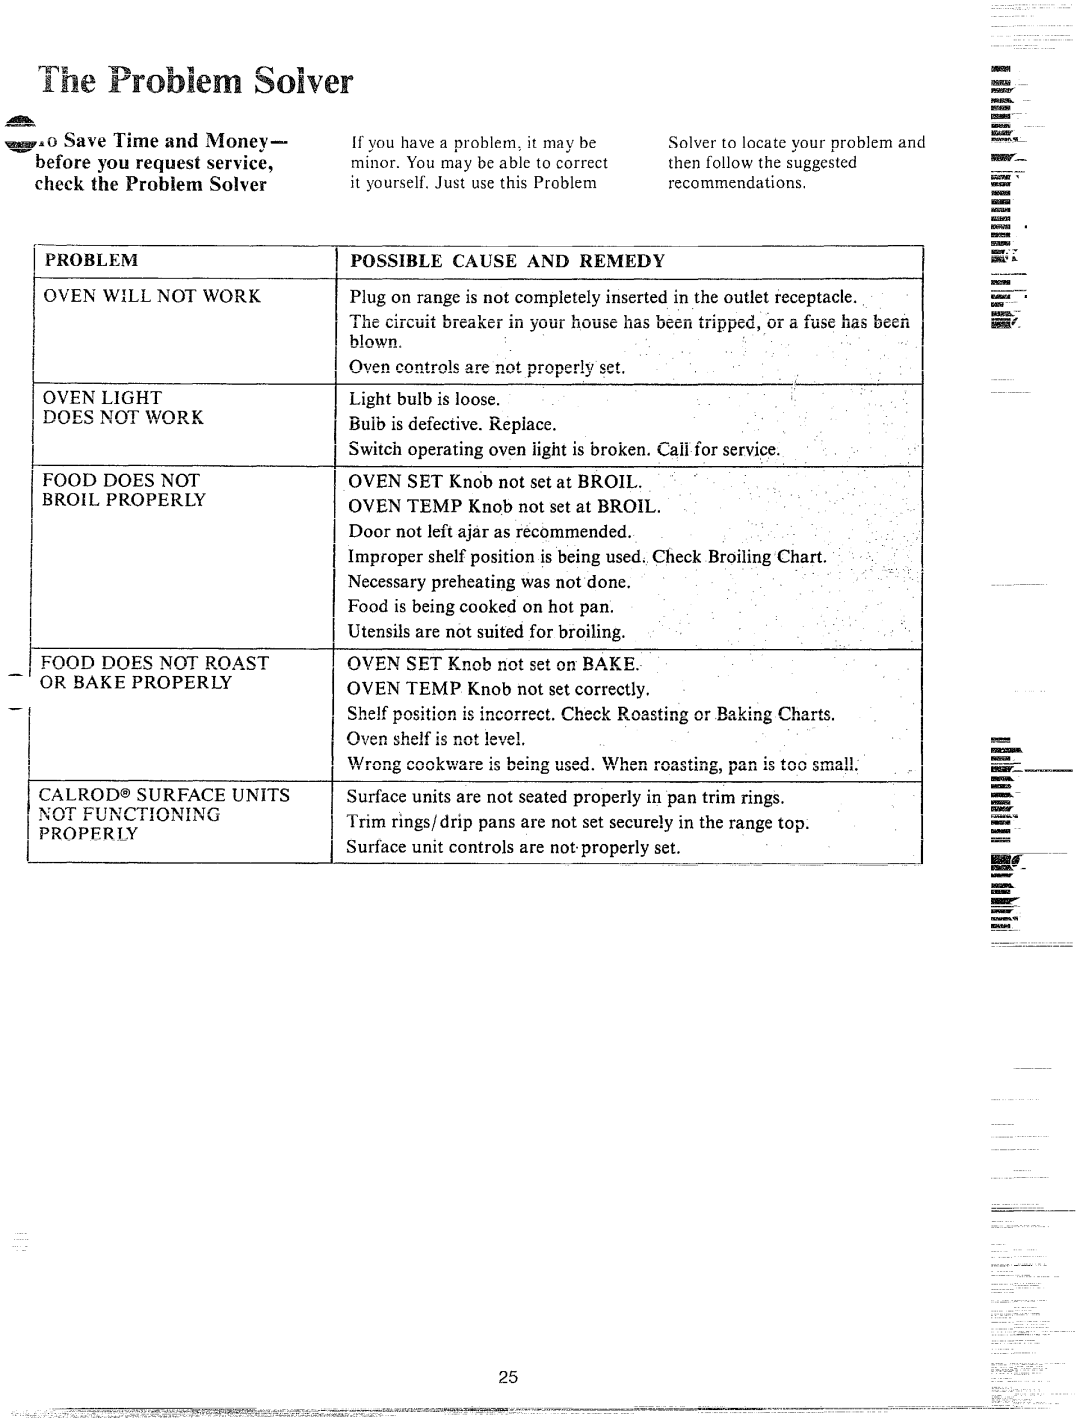 GE JHC56G manual check the Problem Solver, 1PROBLEM, Possible Cause And Remedy 